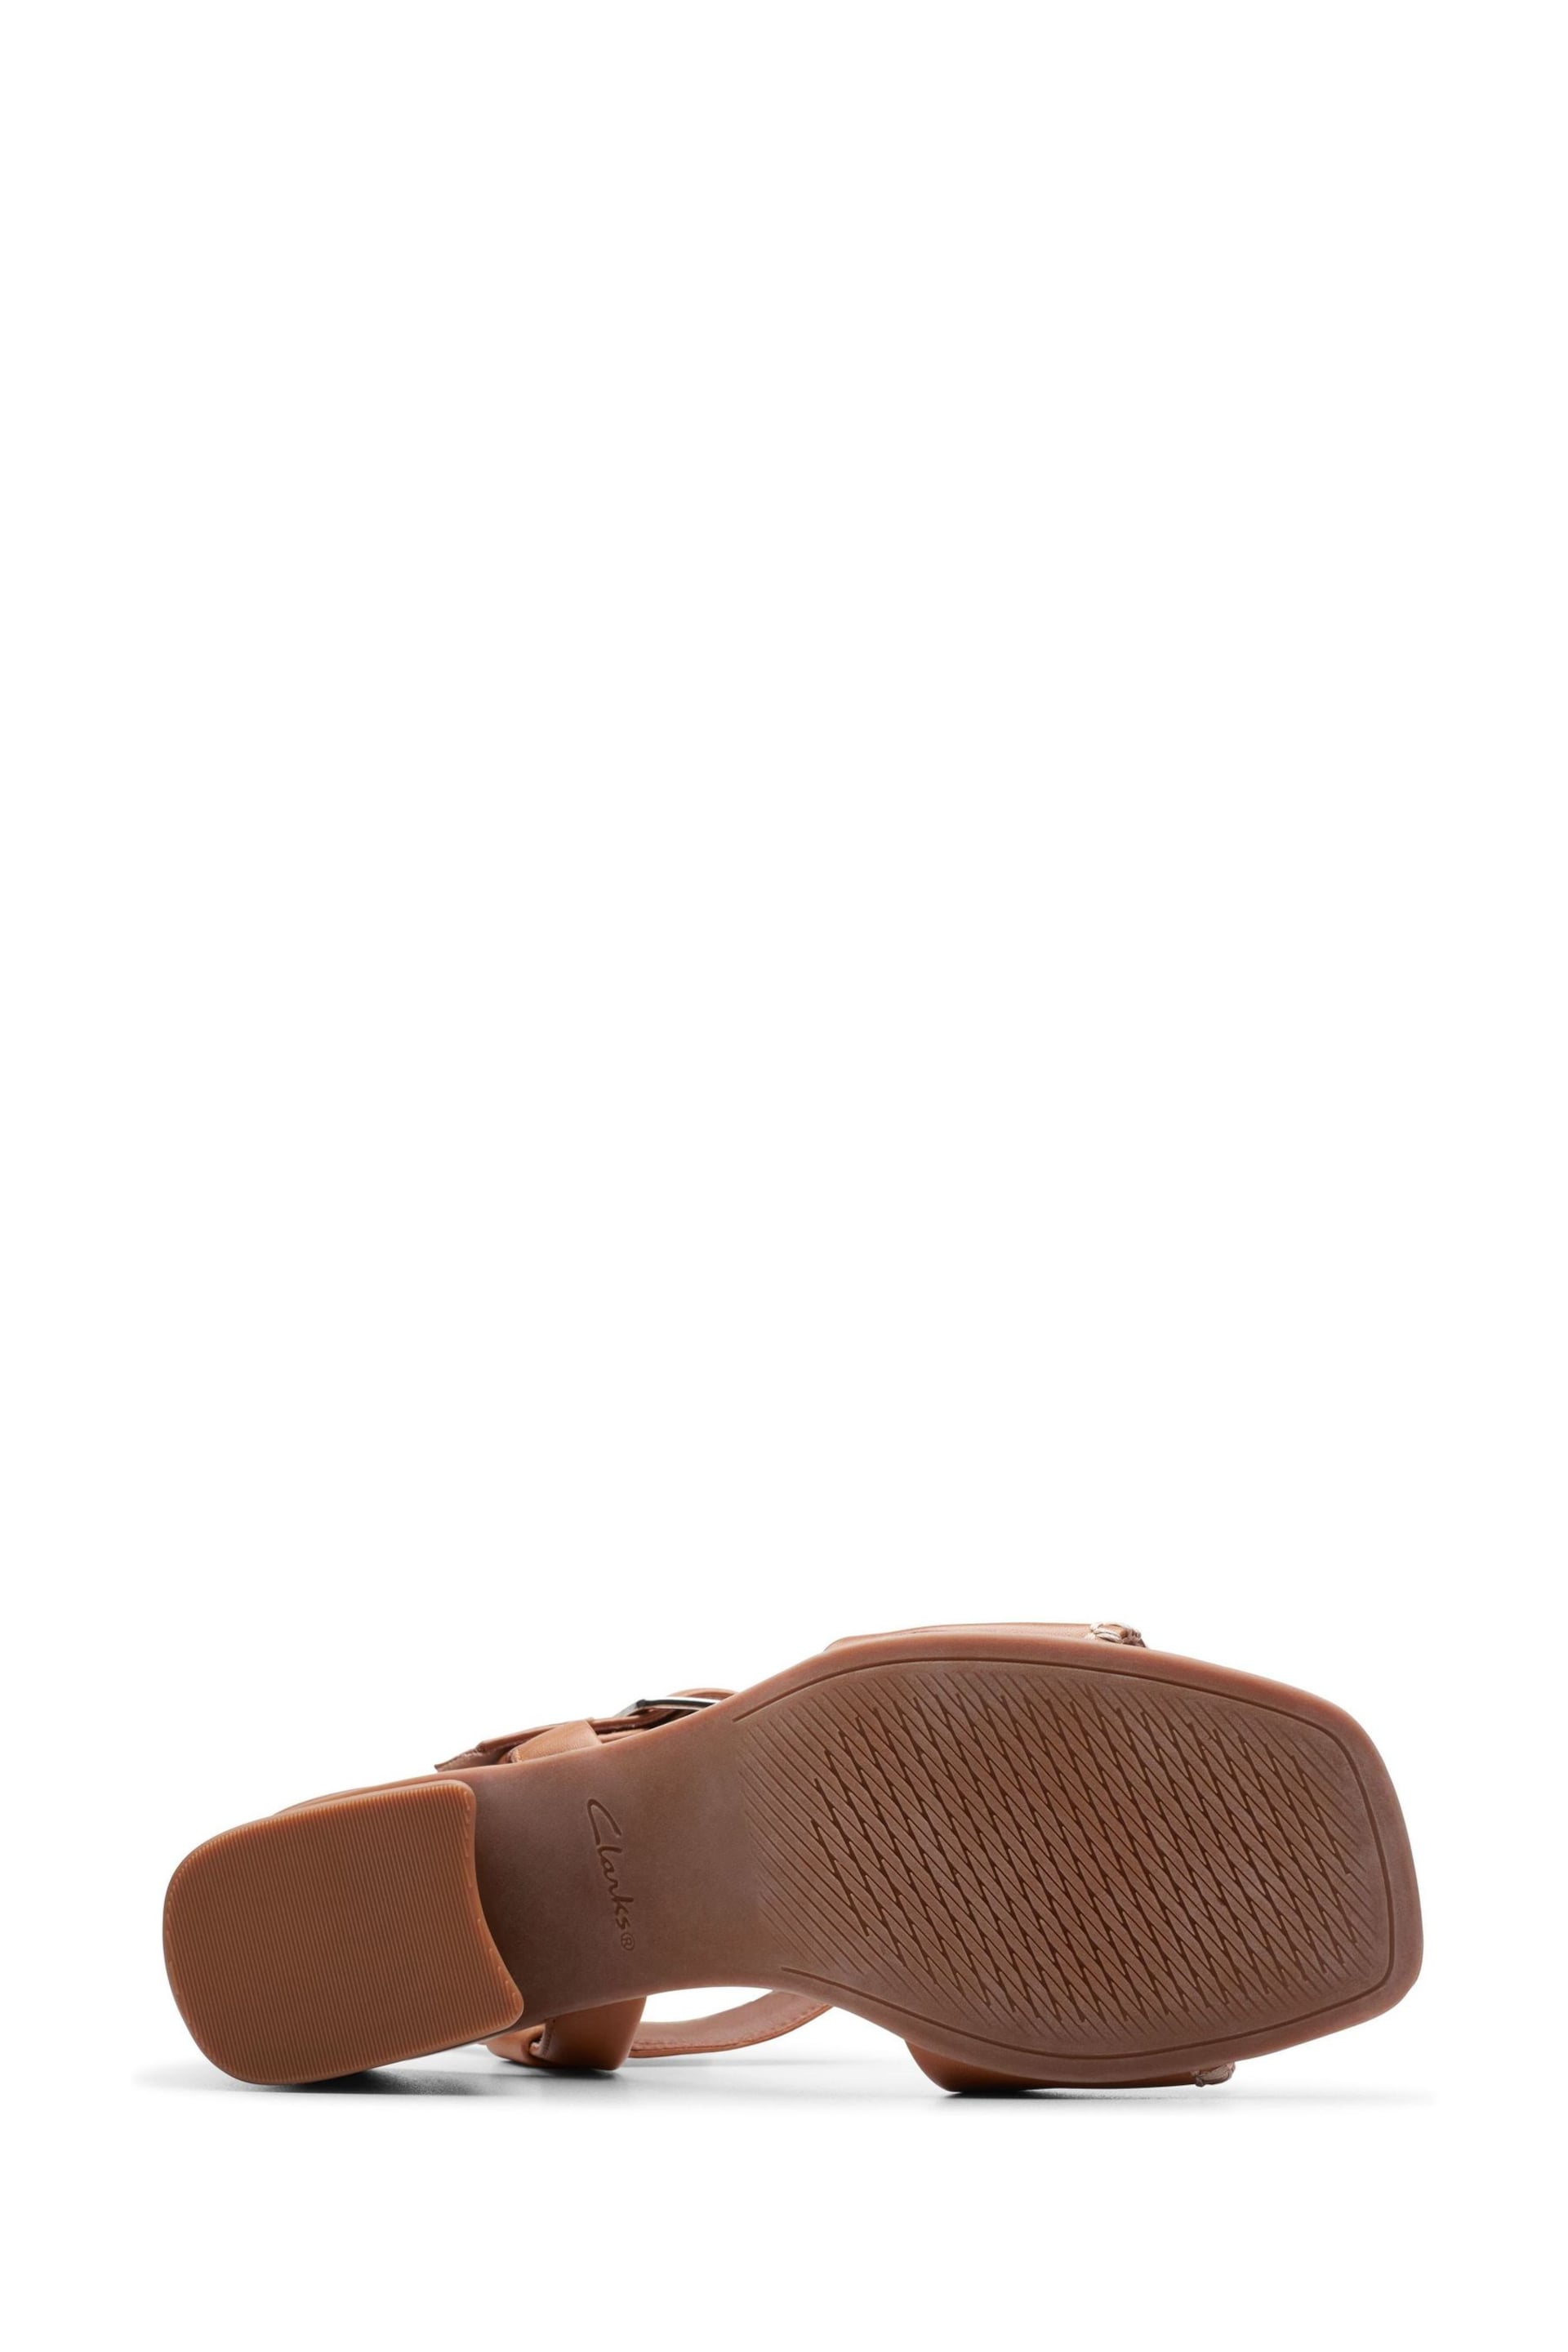 Clarks Brown Leather Siara65 Buckle Sandals - Image 7 of 7